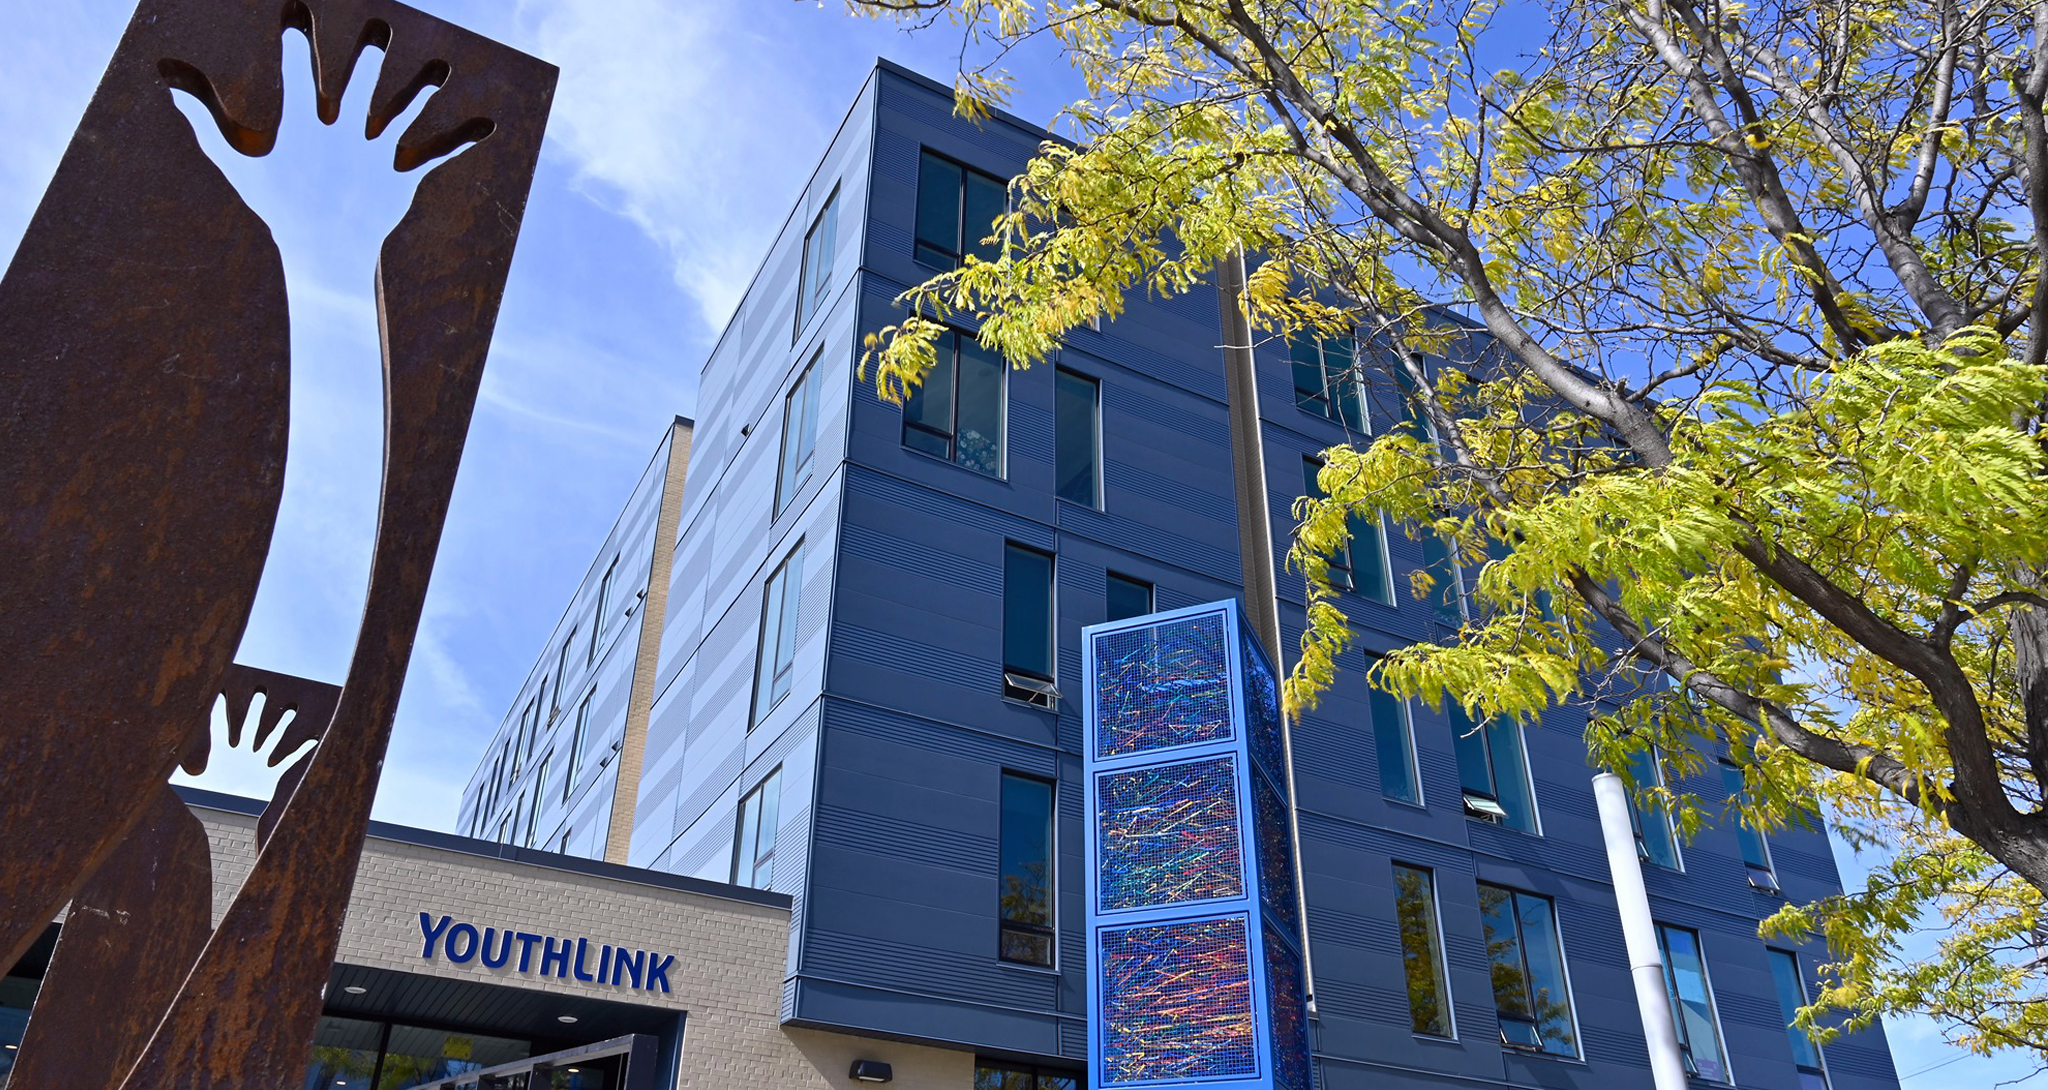 Exterior of Youthlink building